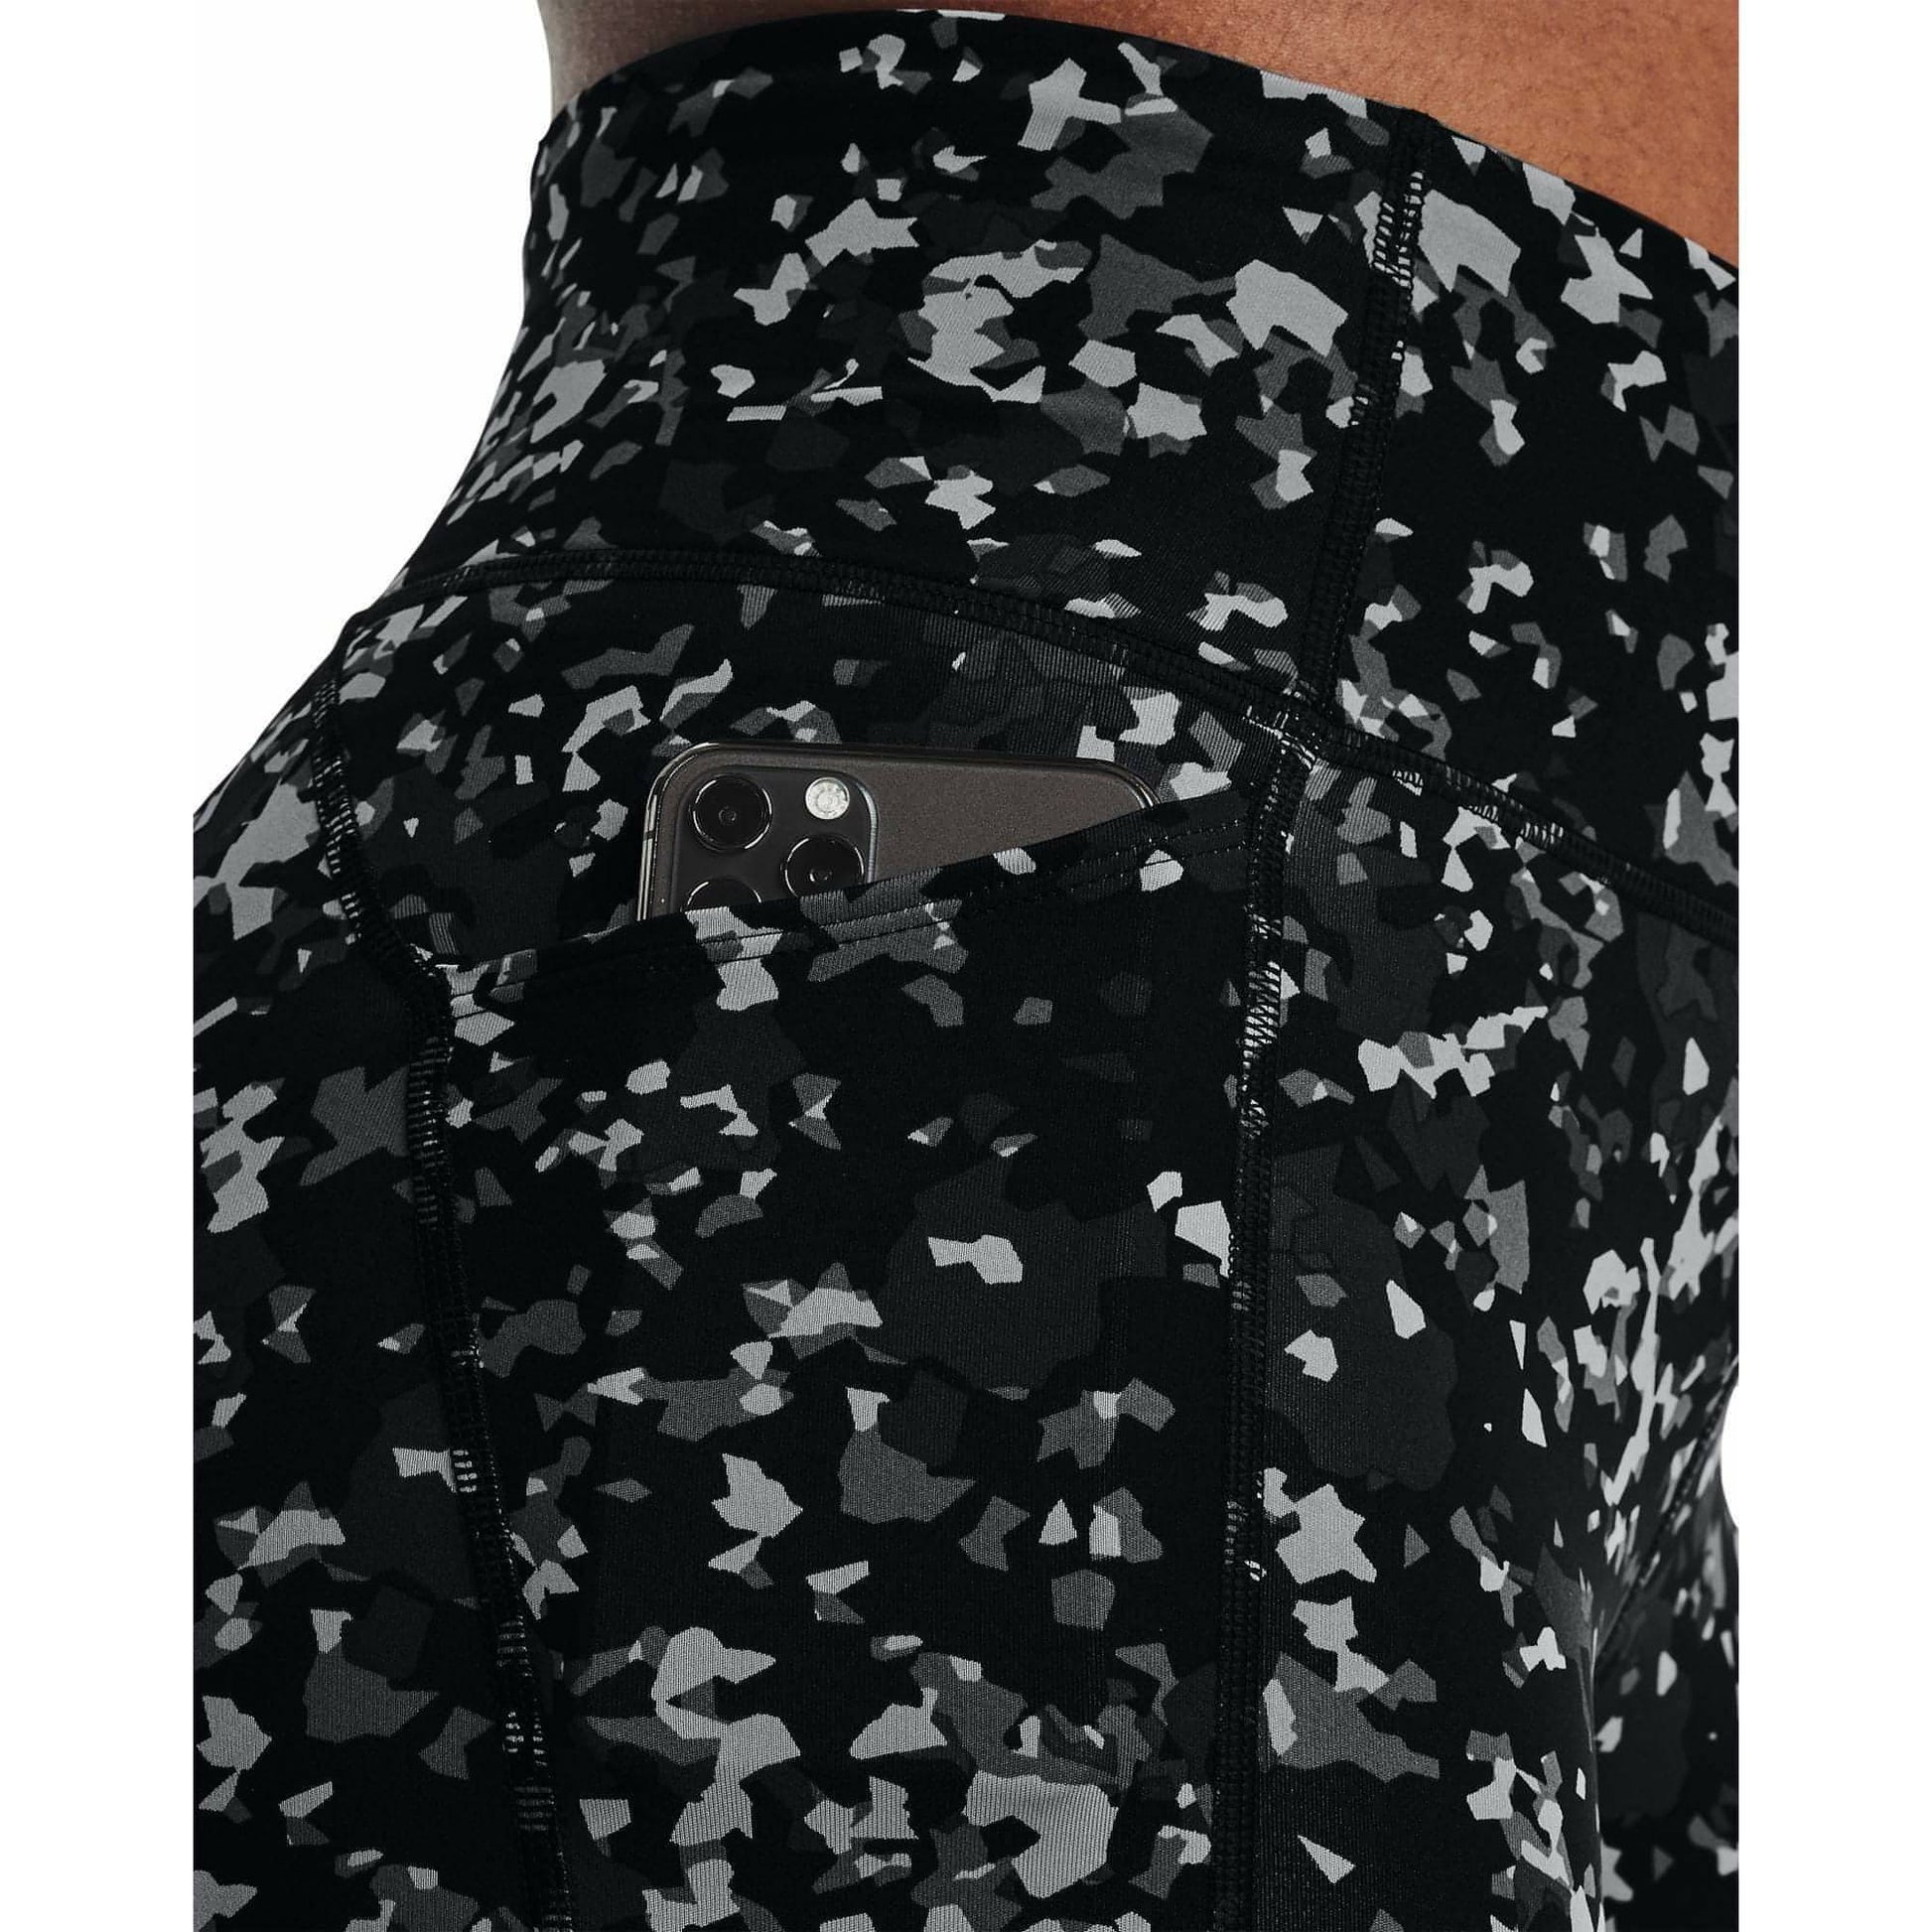 Under Armour Fly Fast 3.0 Printed Womens 7/8 Running Tights - Black - Start Fitness